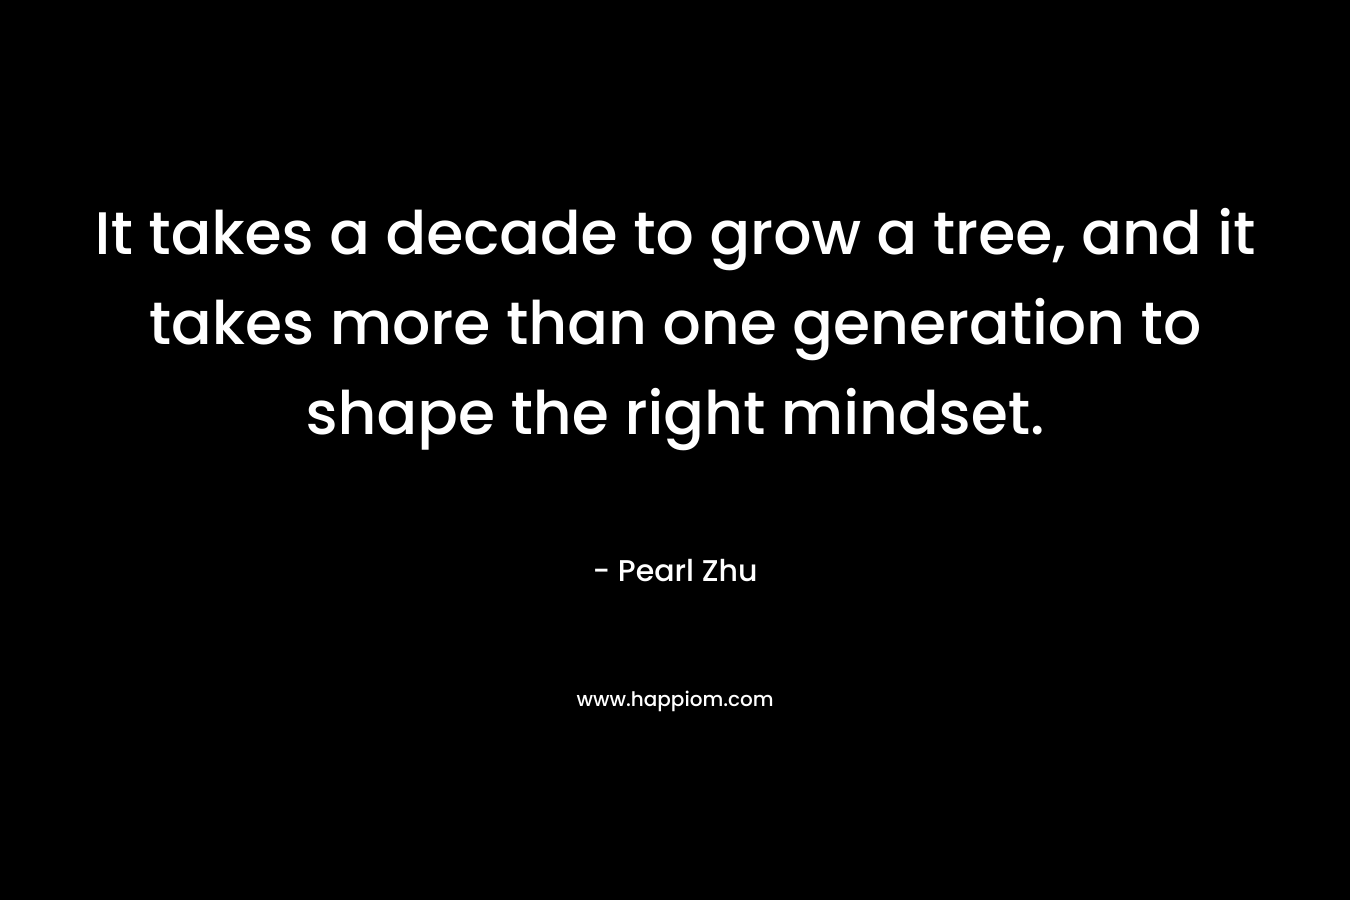 It takes a decade to grow a tree, and it takes more than one generation to shape the right mindset. – Pearl Zhu